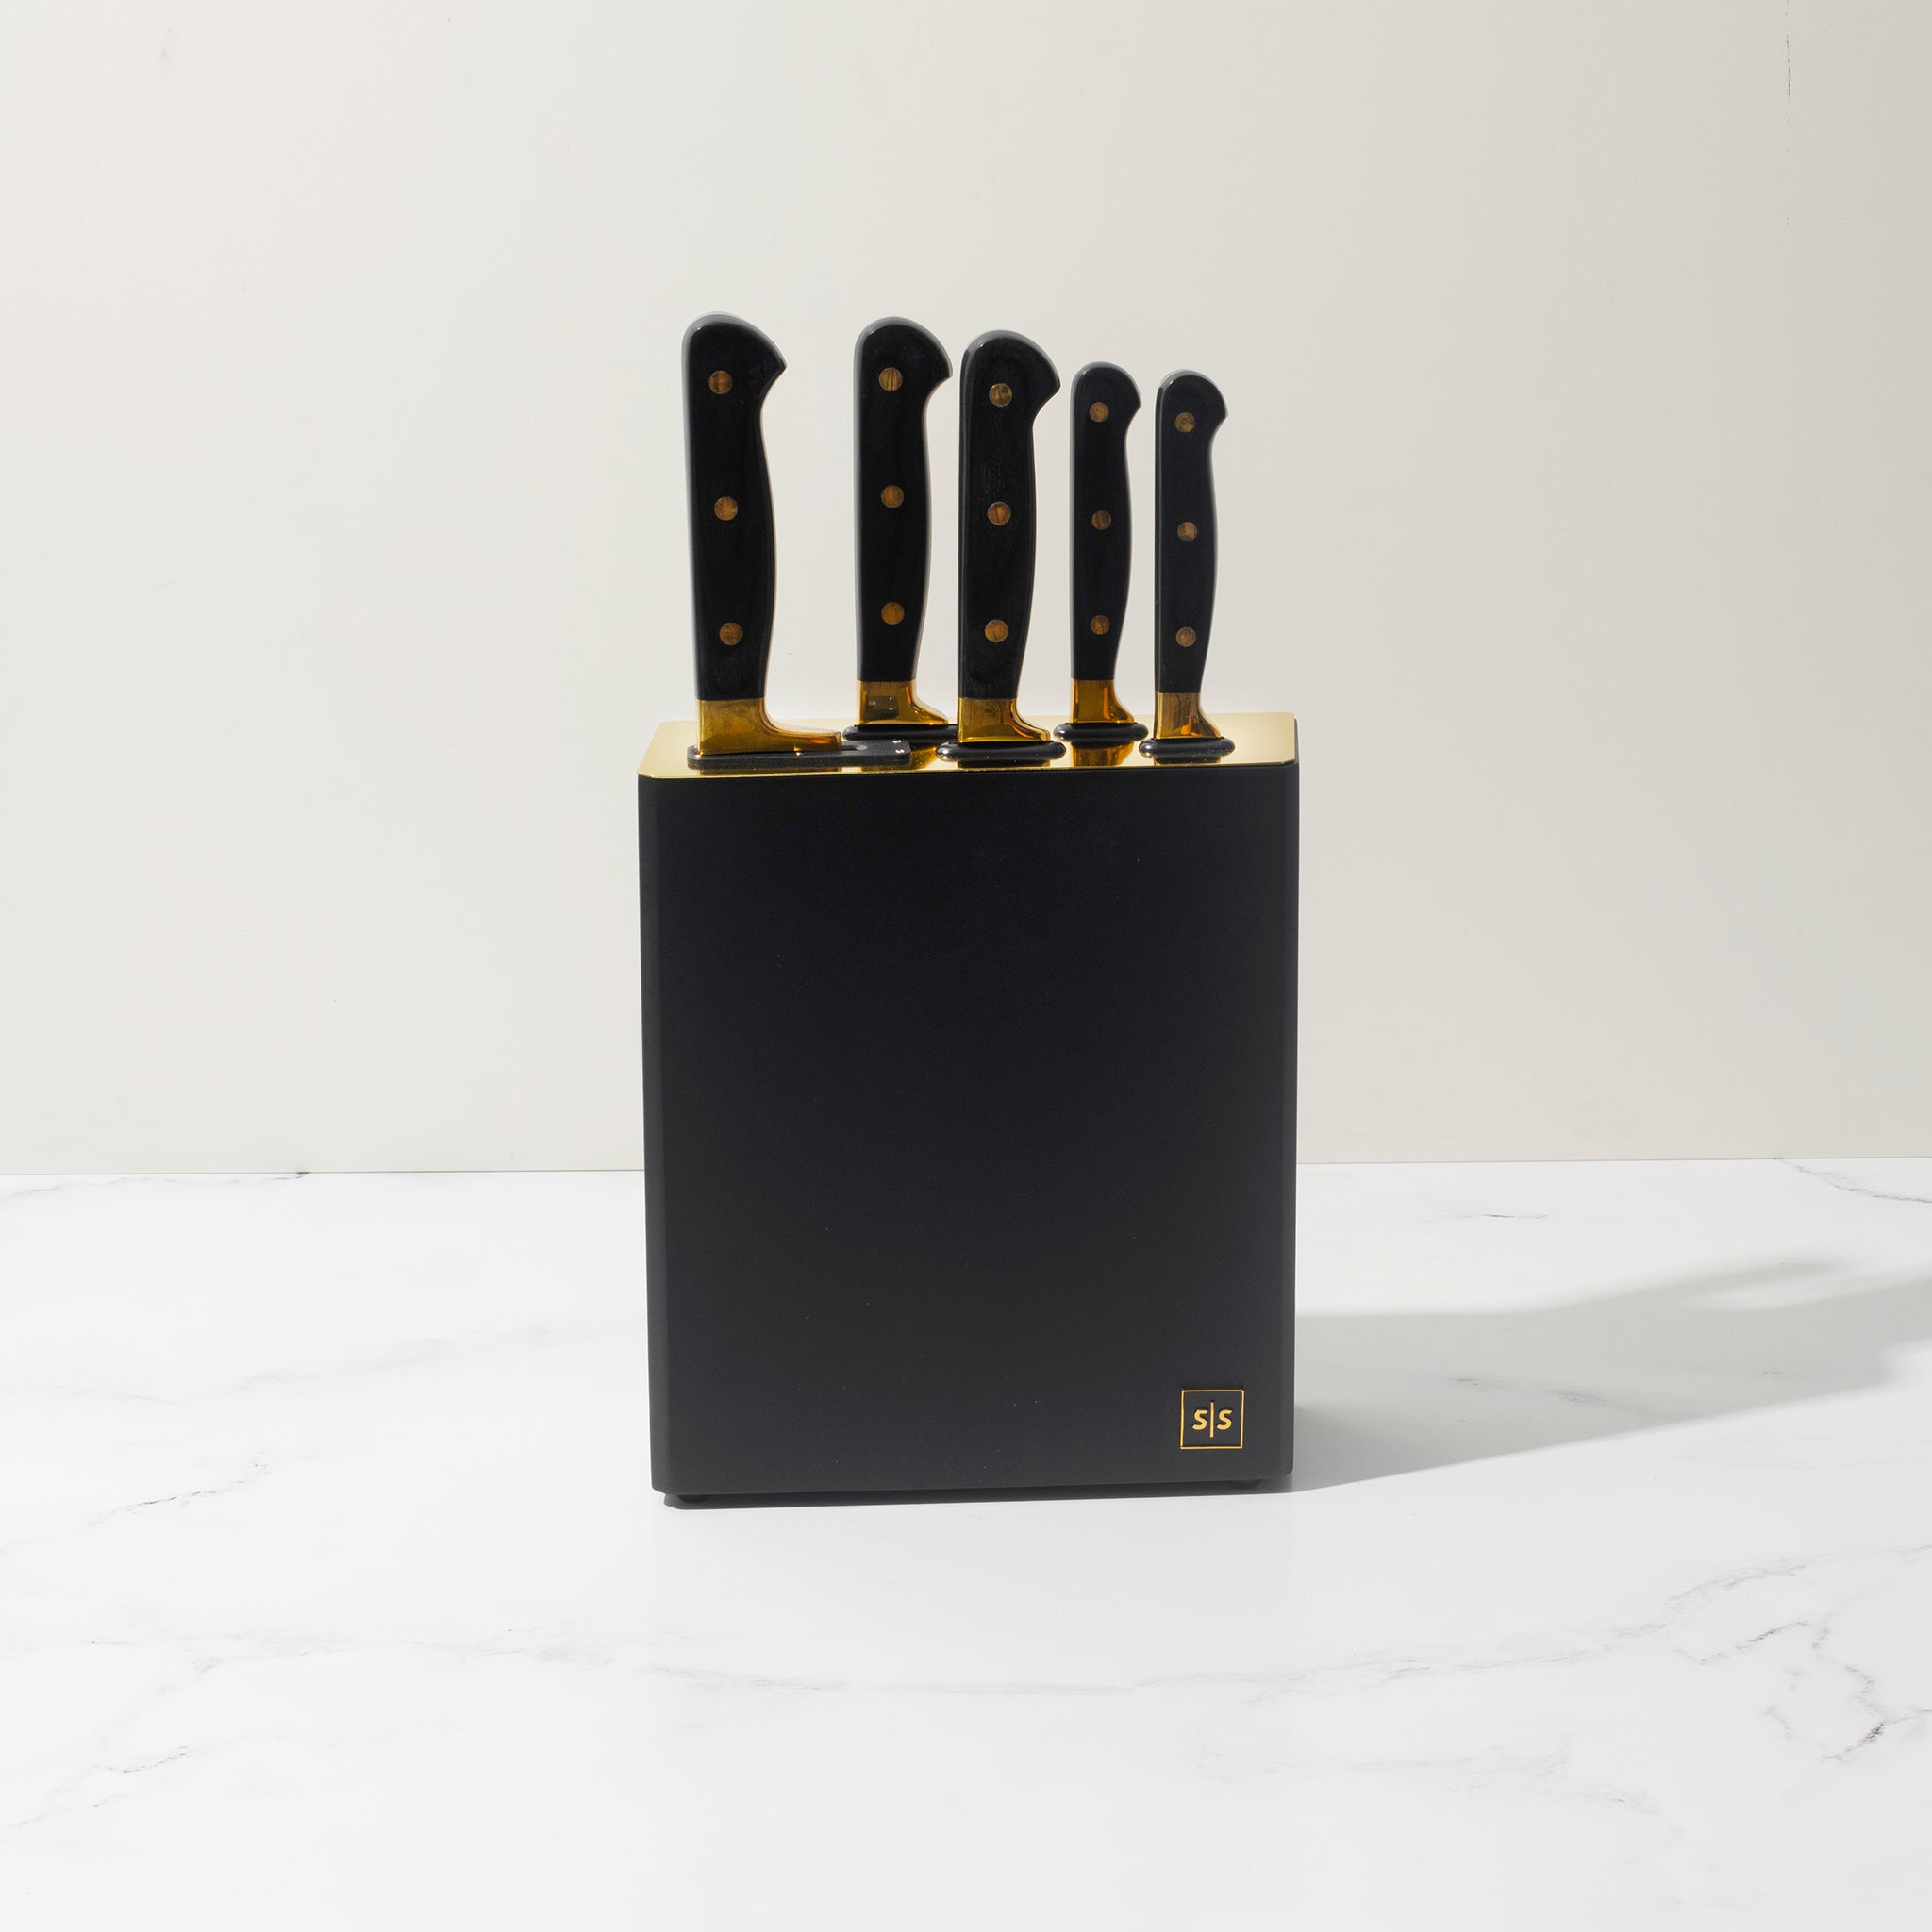 Black and Gold Knife Set With Block - Gold Handle Knife Set with Self  Sharpening Kitchen Knife Holder With Full Tang Gold Knives & Self  Sharpening